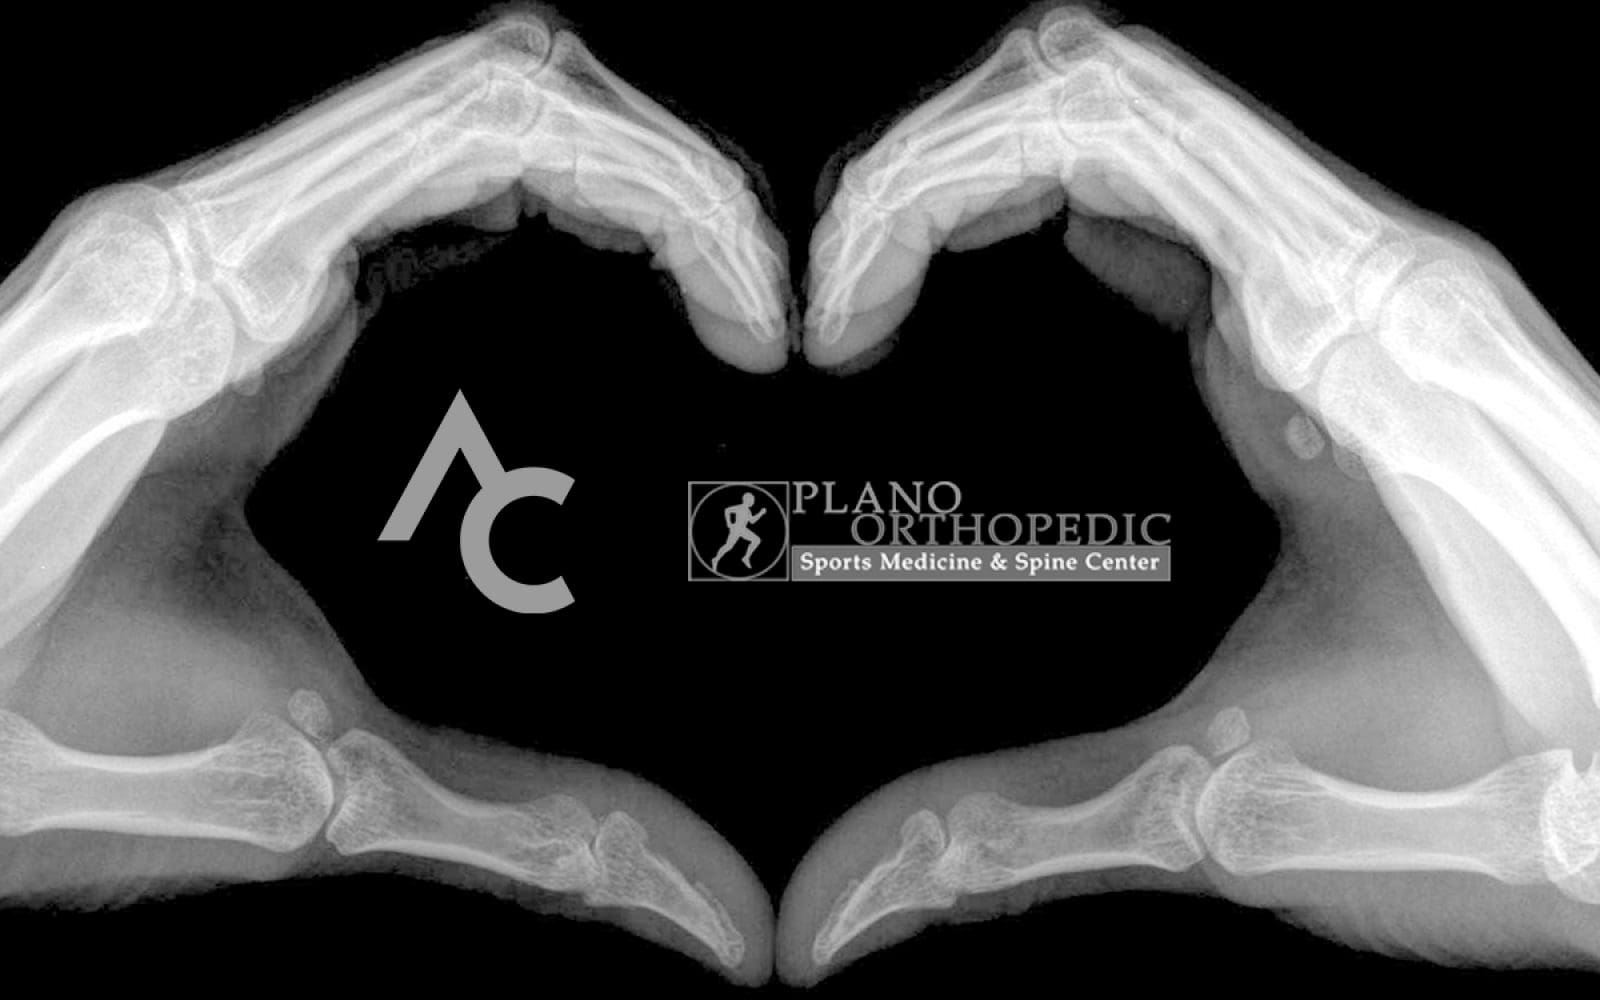 Plano Orthopedic Sports Medicine & Spine Center selects Ad Agency